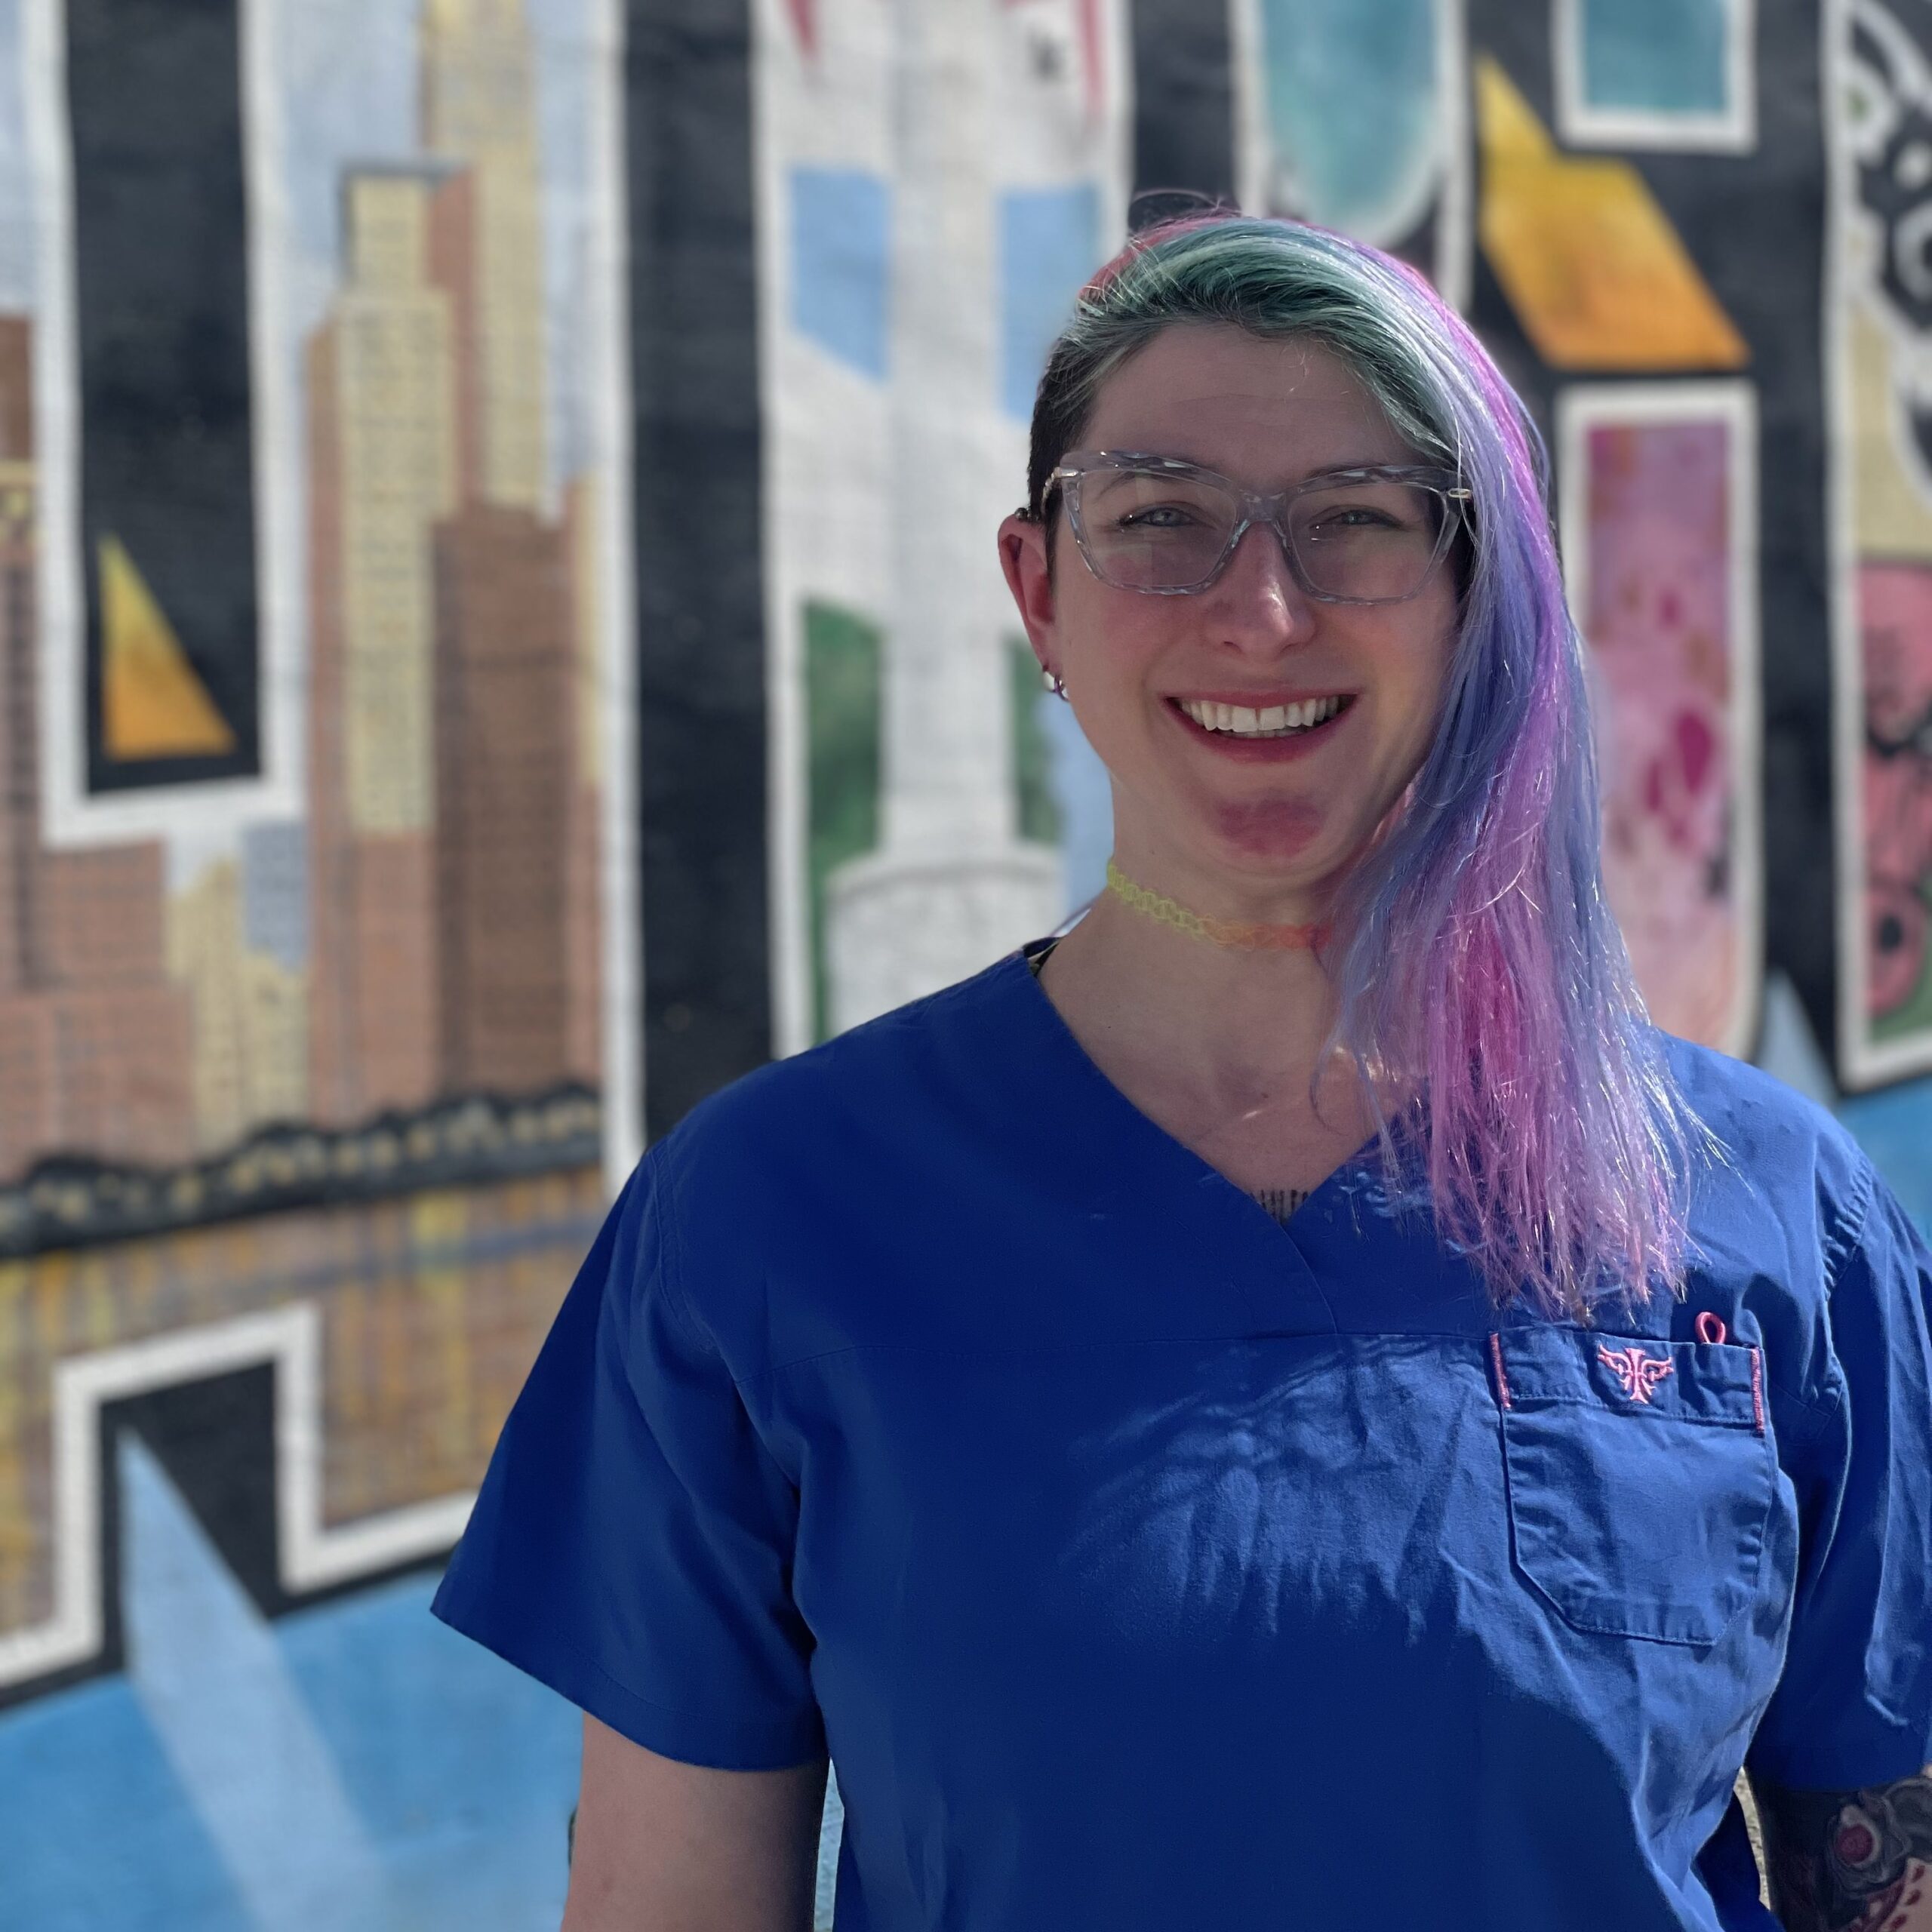 Brooce vet tech standing in front of a Chicago mural